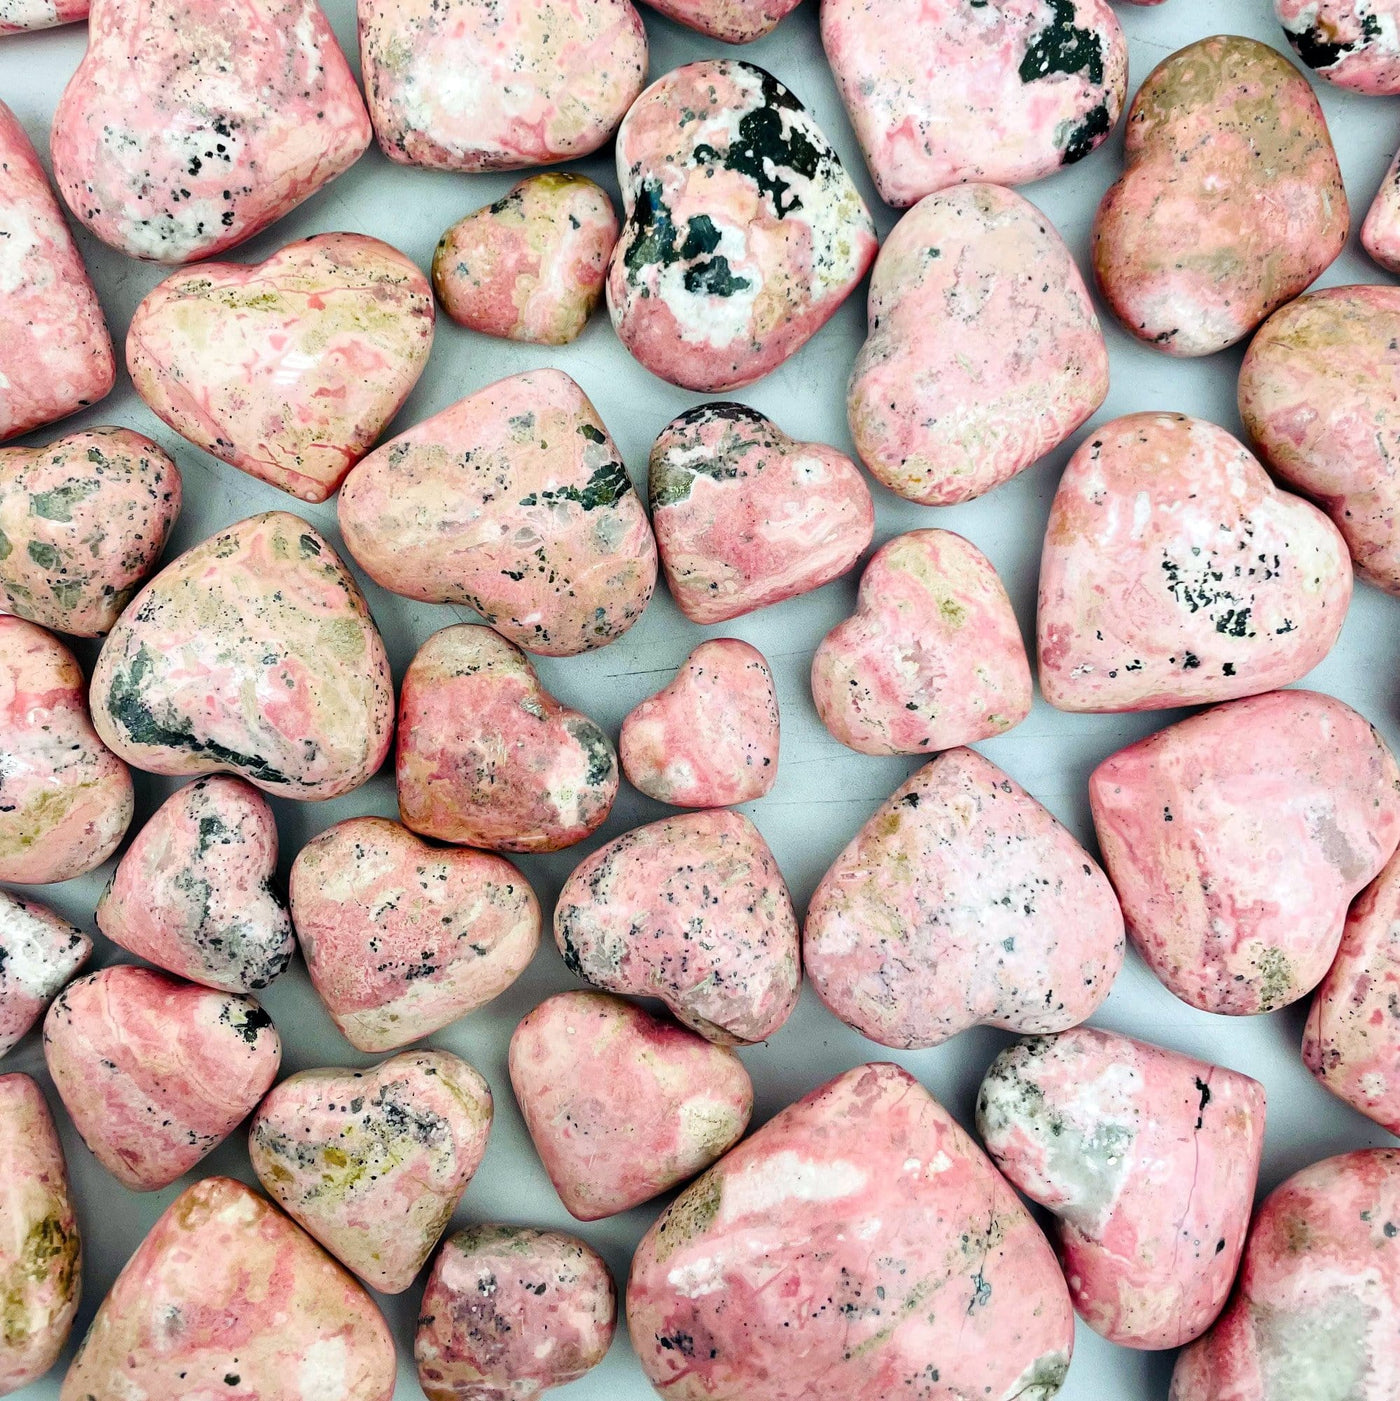 Rhodonite Hearts scattered on gray background